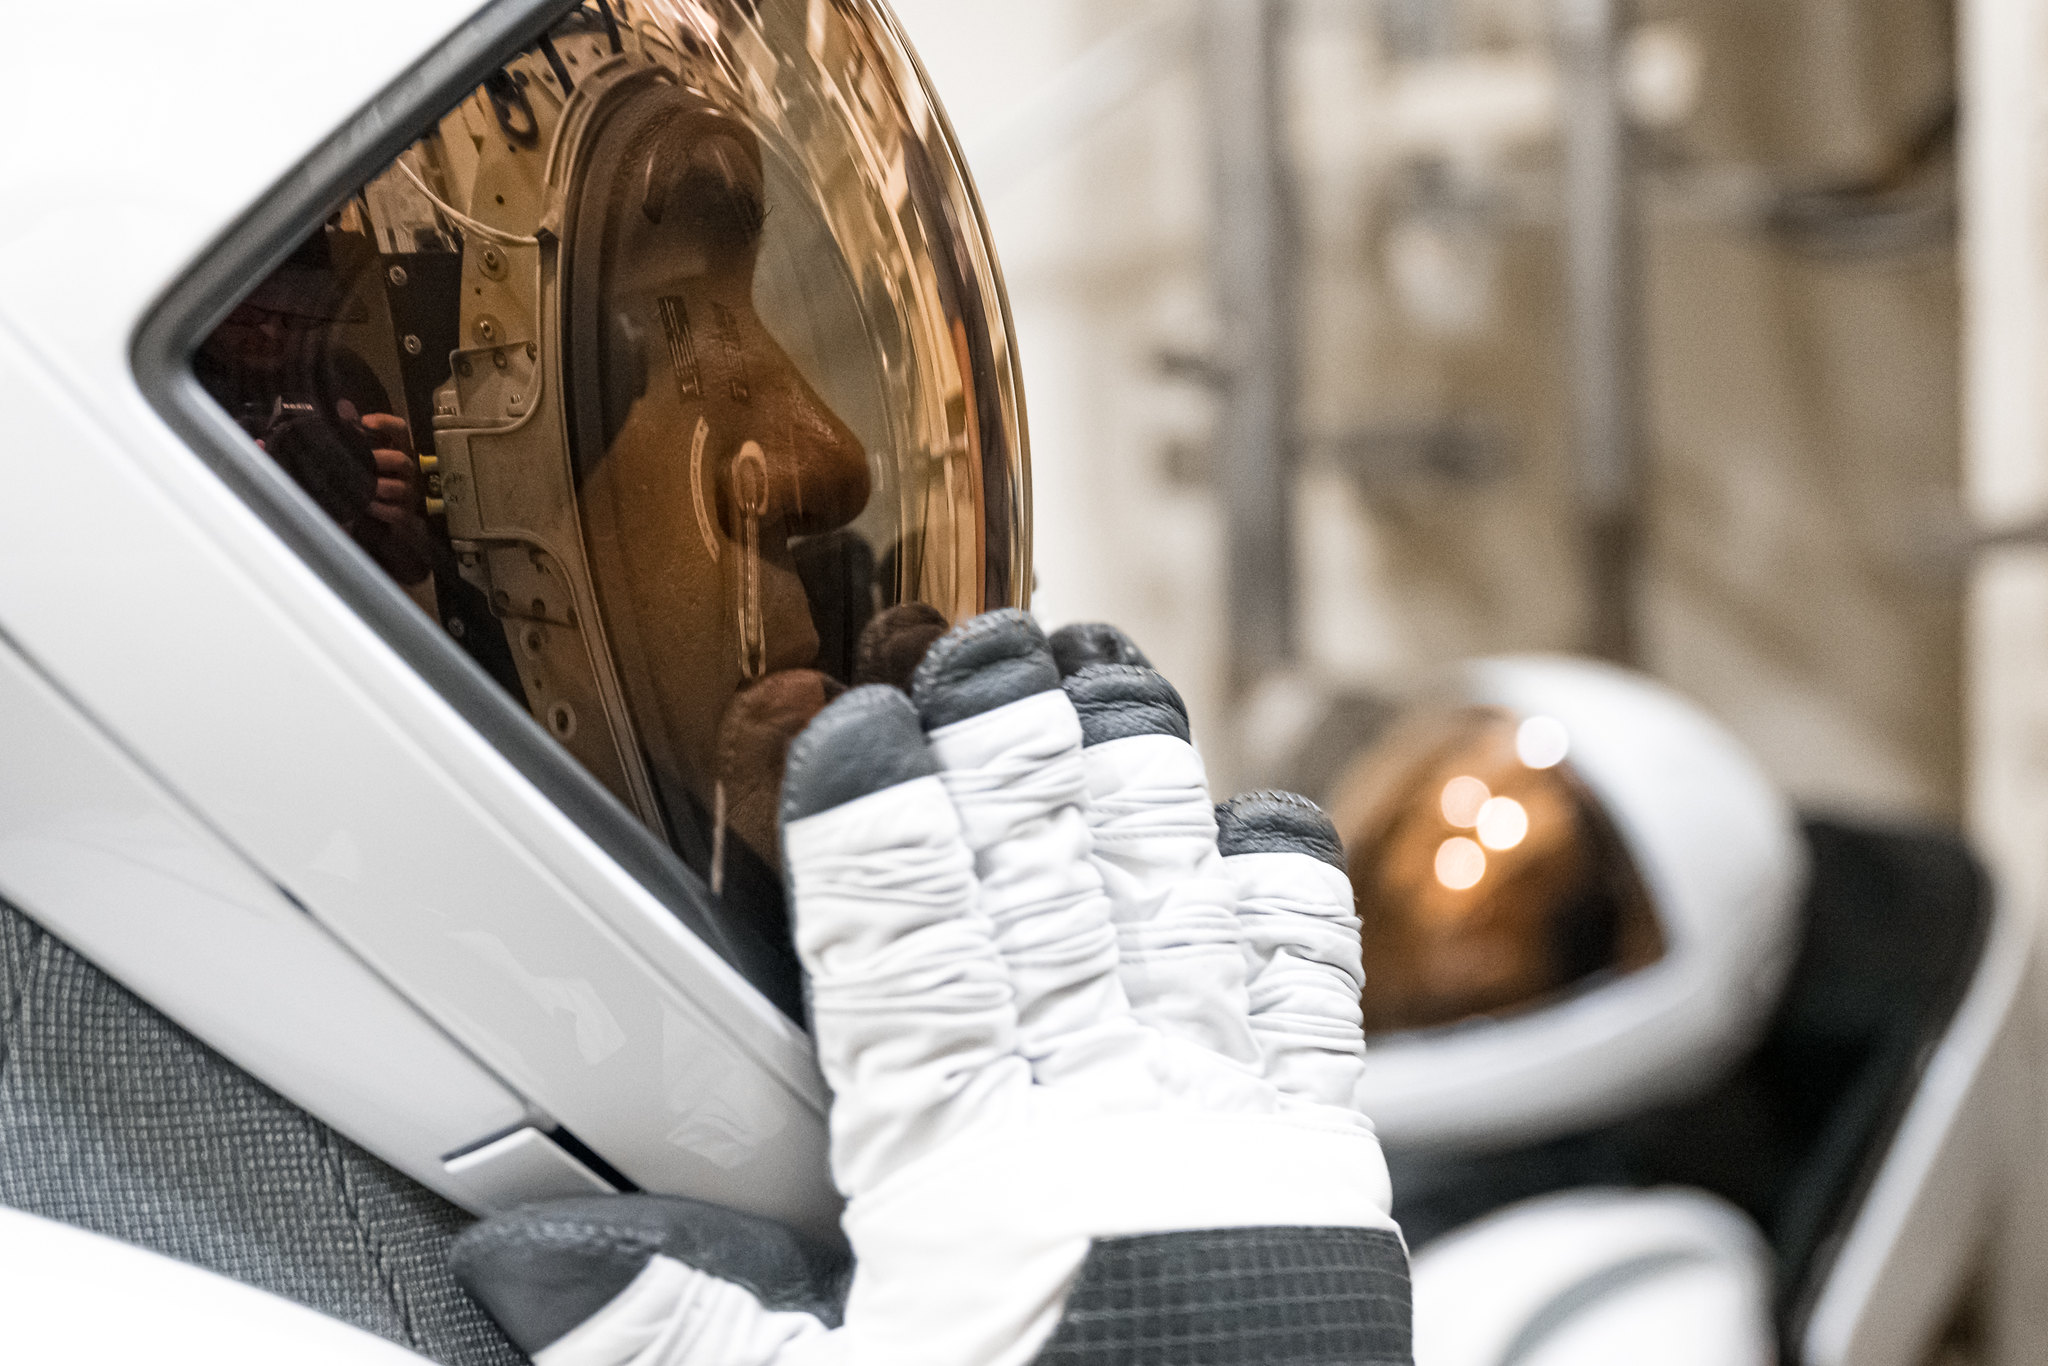 Final try-on: Polaris Dawn mission crew tests spacesuits in a vacuum chamber